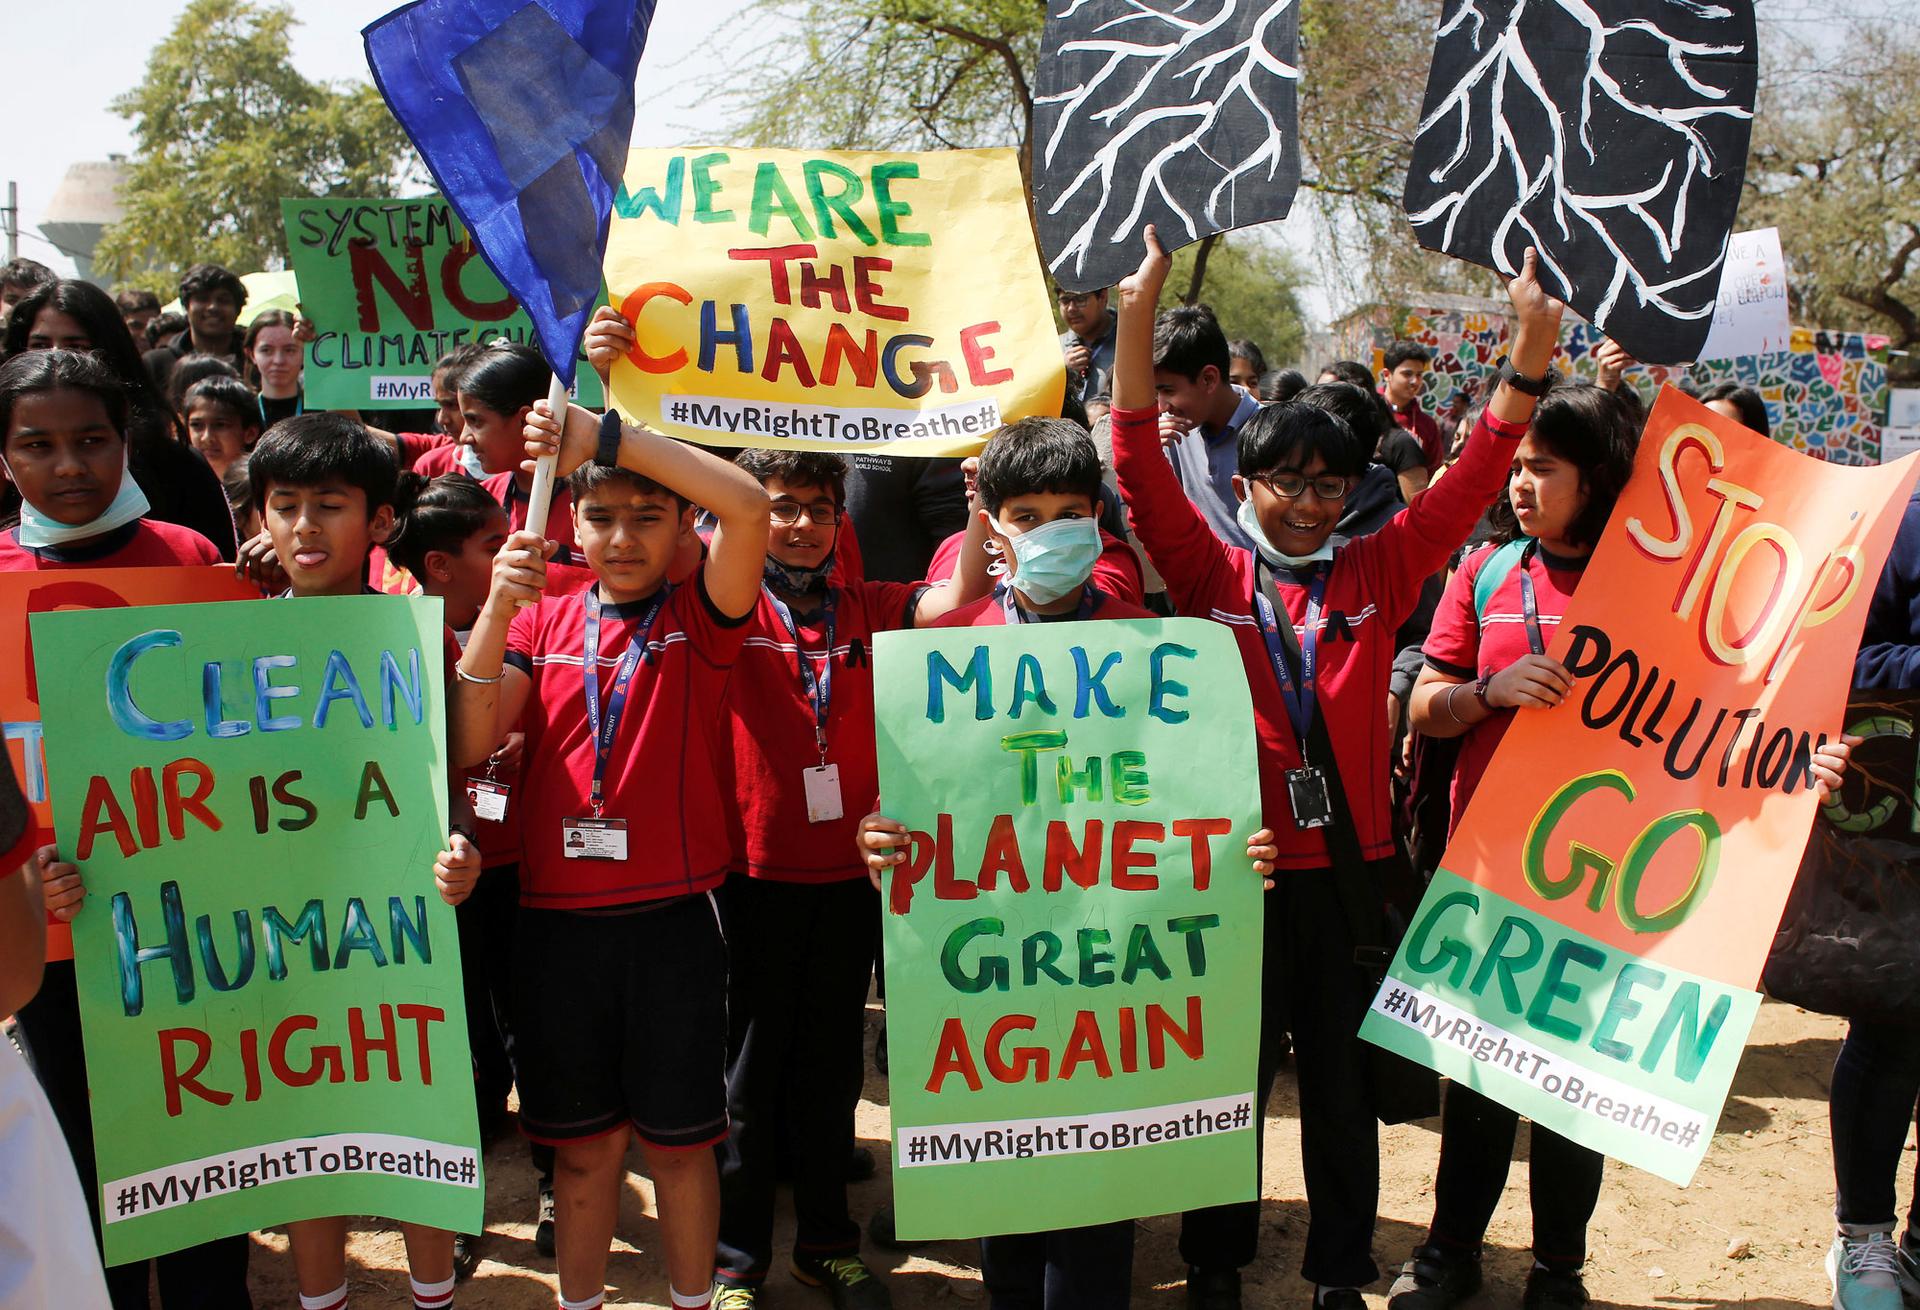 Students in India are shown protesting and carrying a sign that reads: 